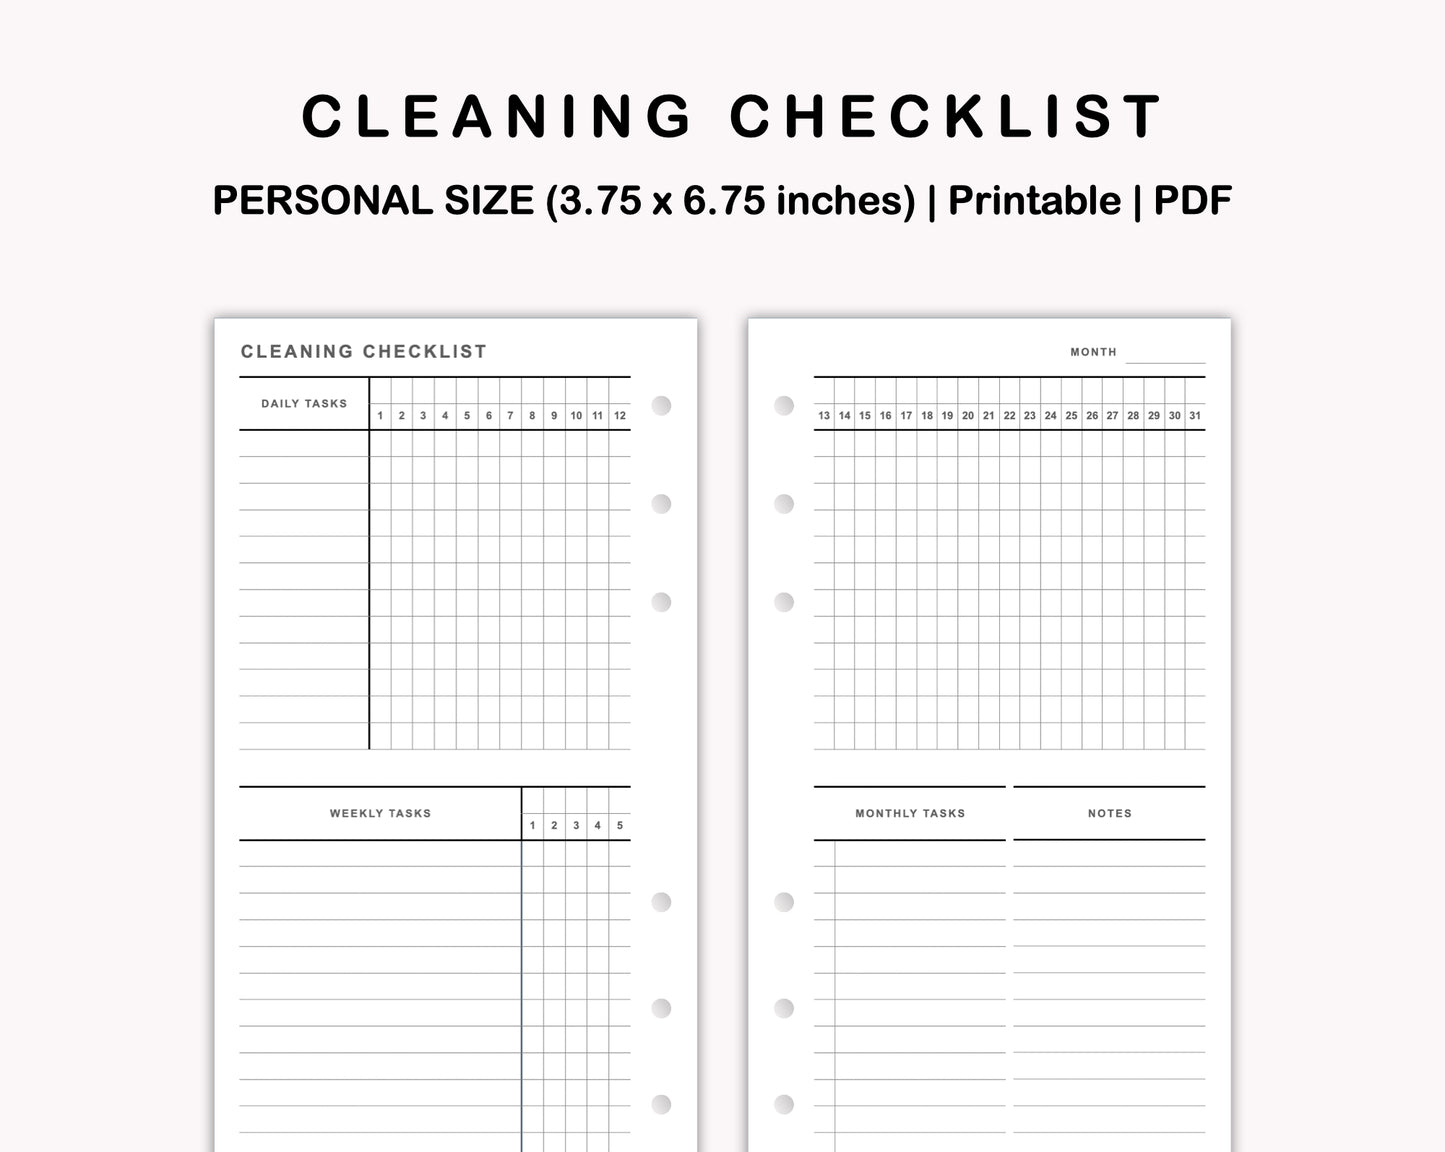 Personal Inserts - Cleaning Checklist